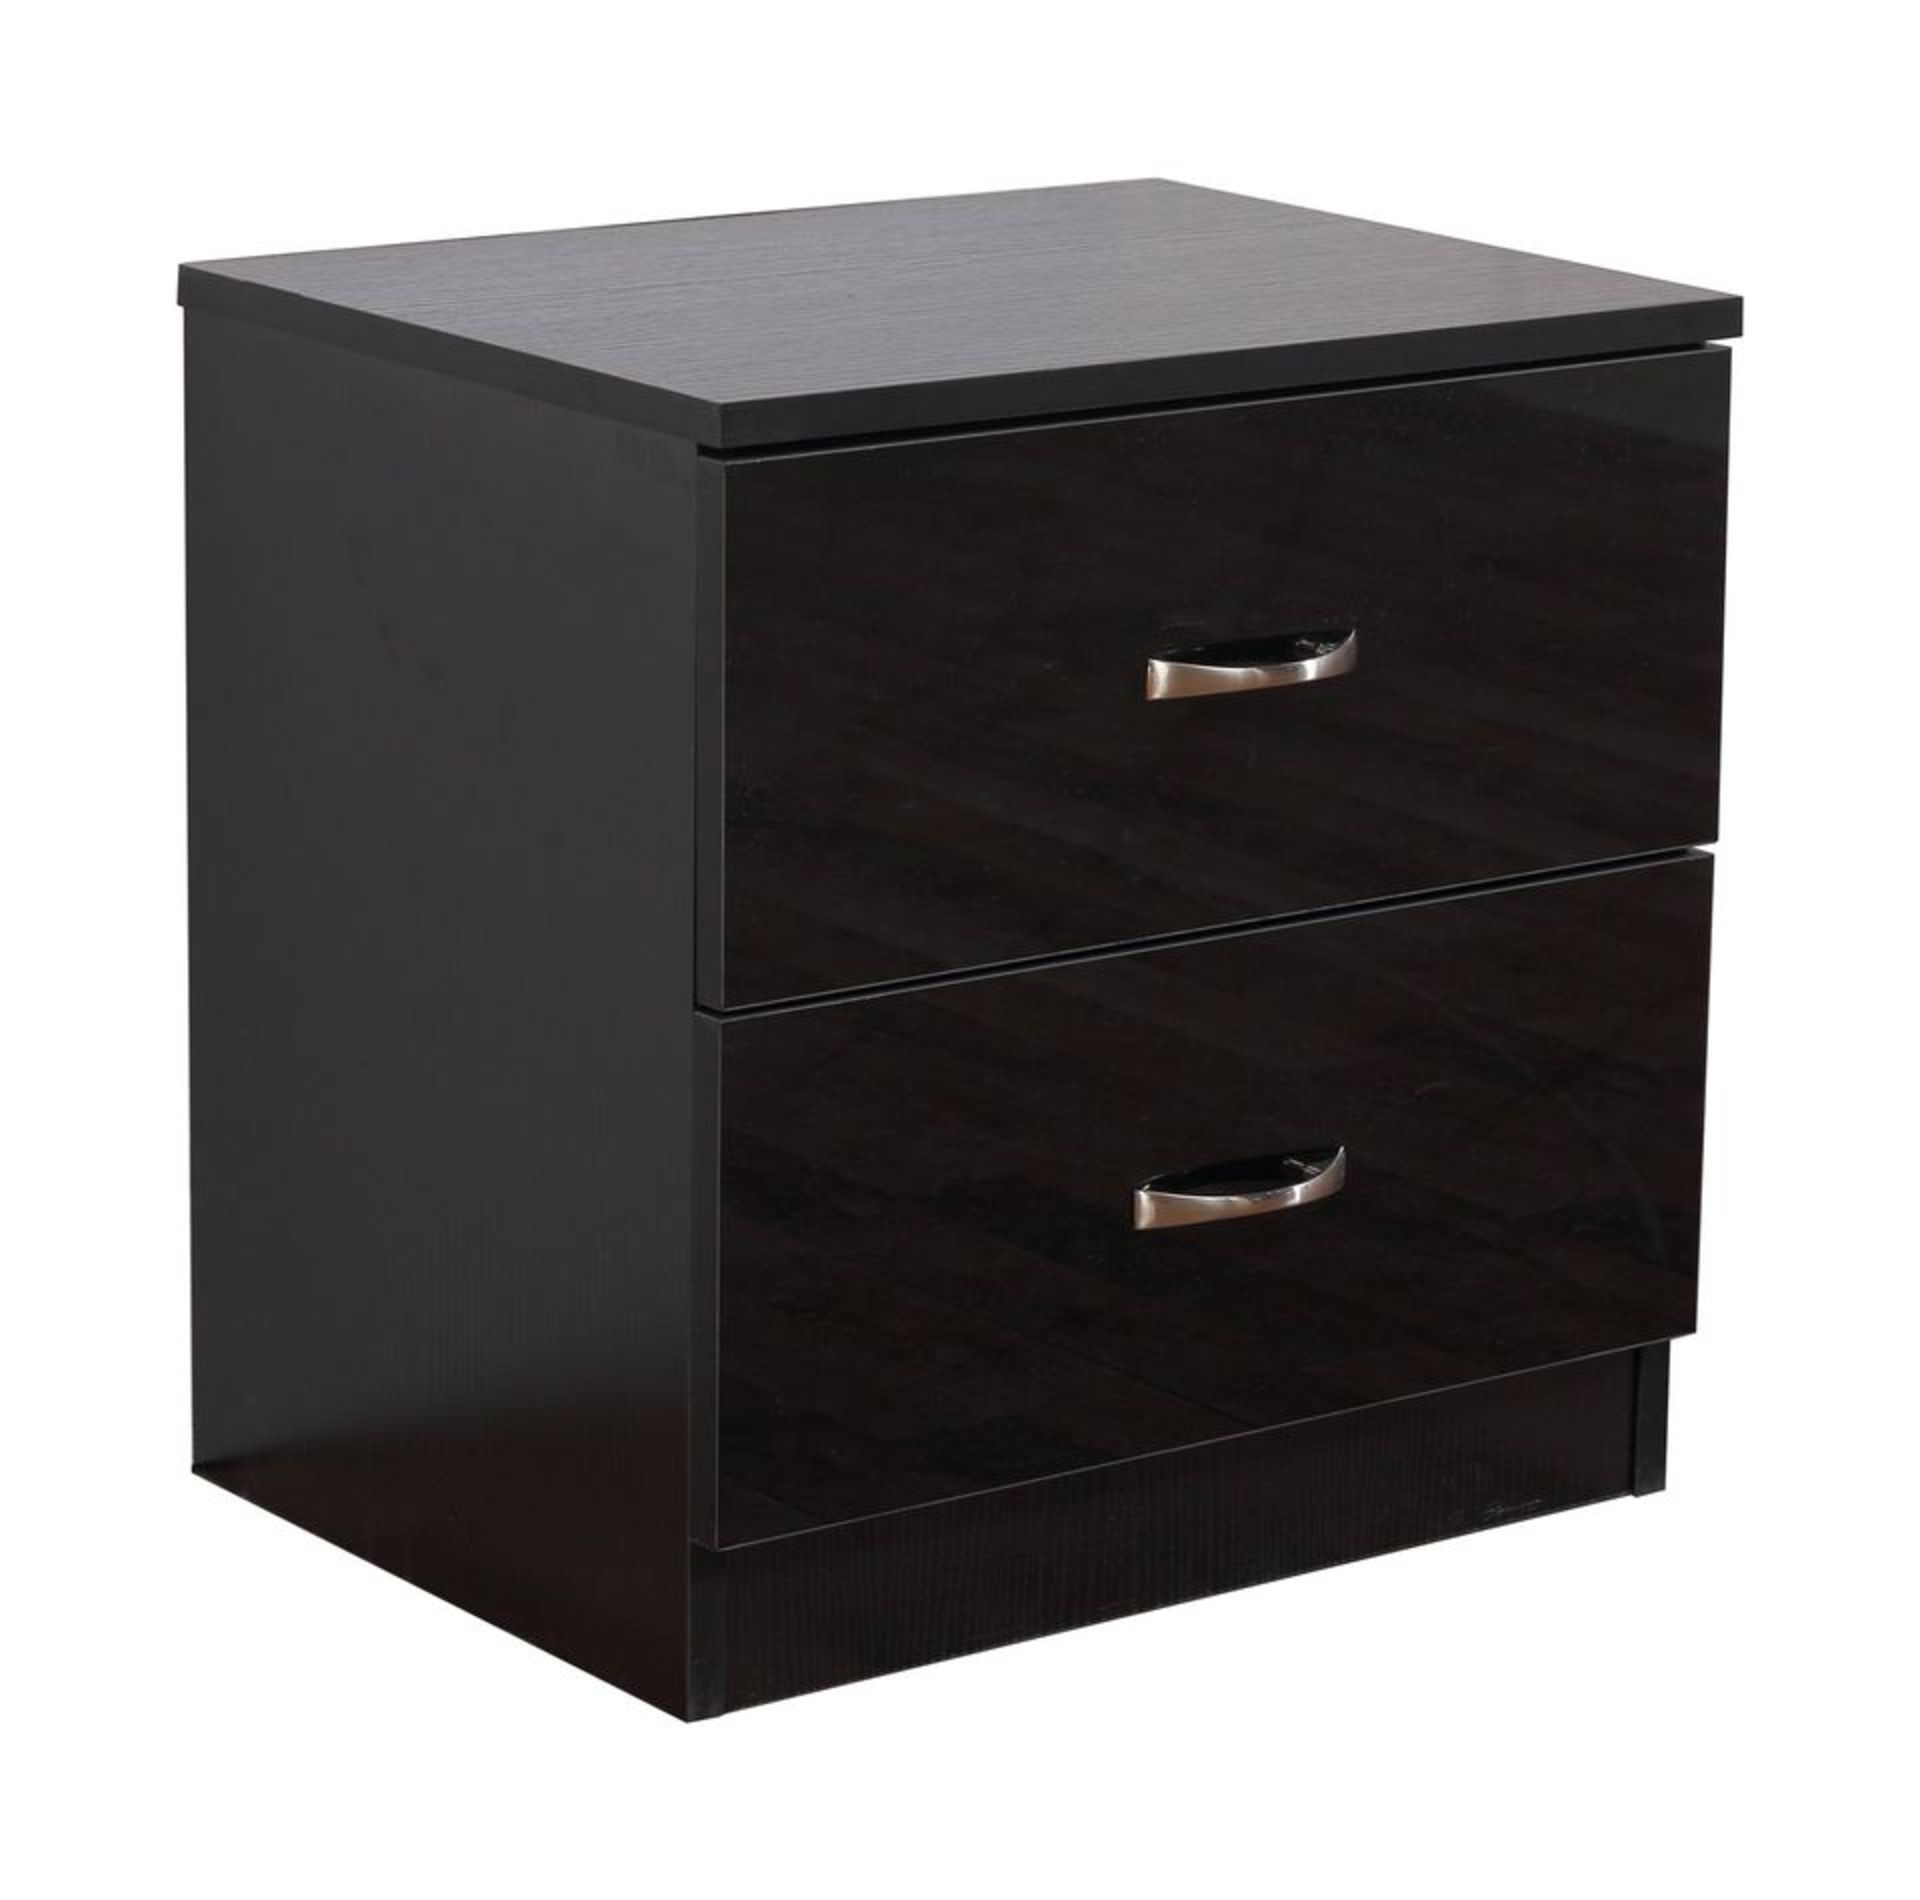 4 X BRAND NEW 2 DRAWER BEDSIDE WITH HIGH GLOSS FRONTS - BRAND NEW BOXED